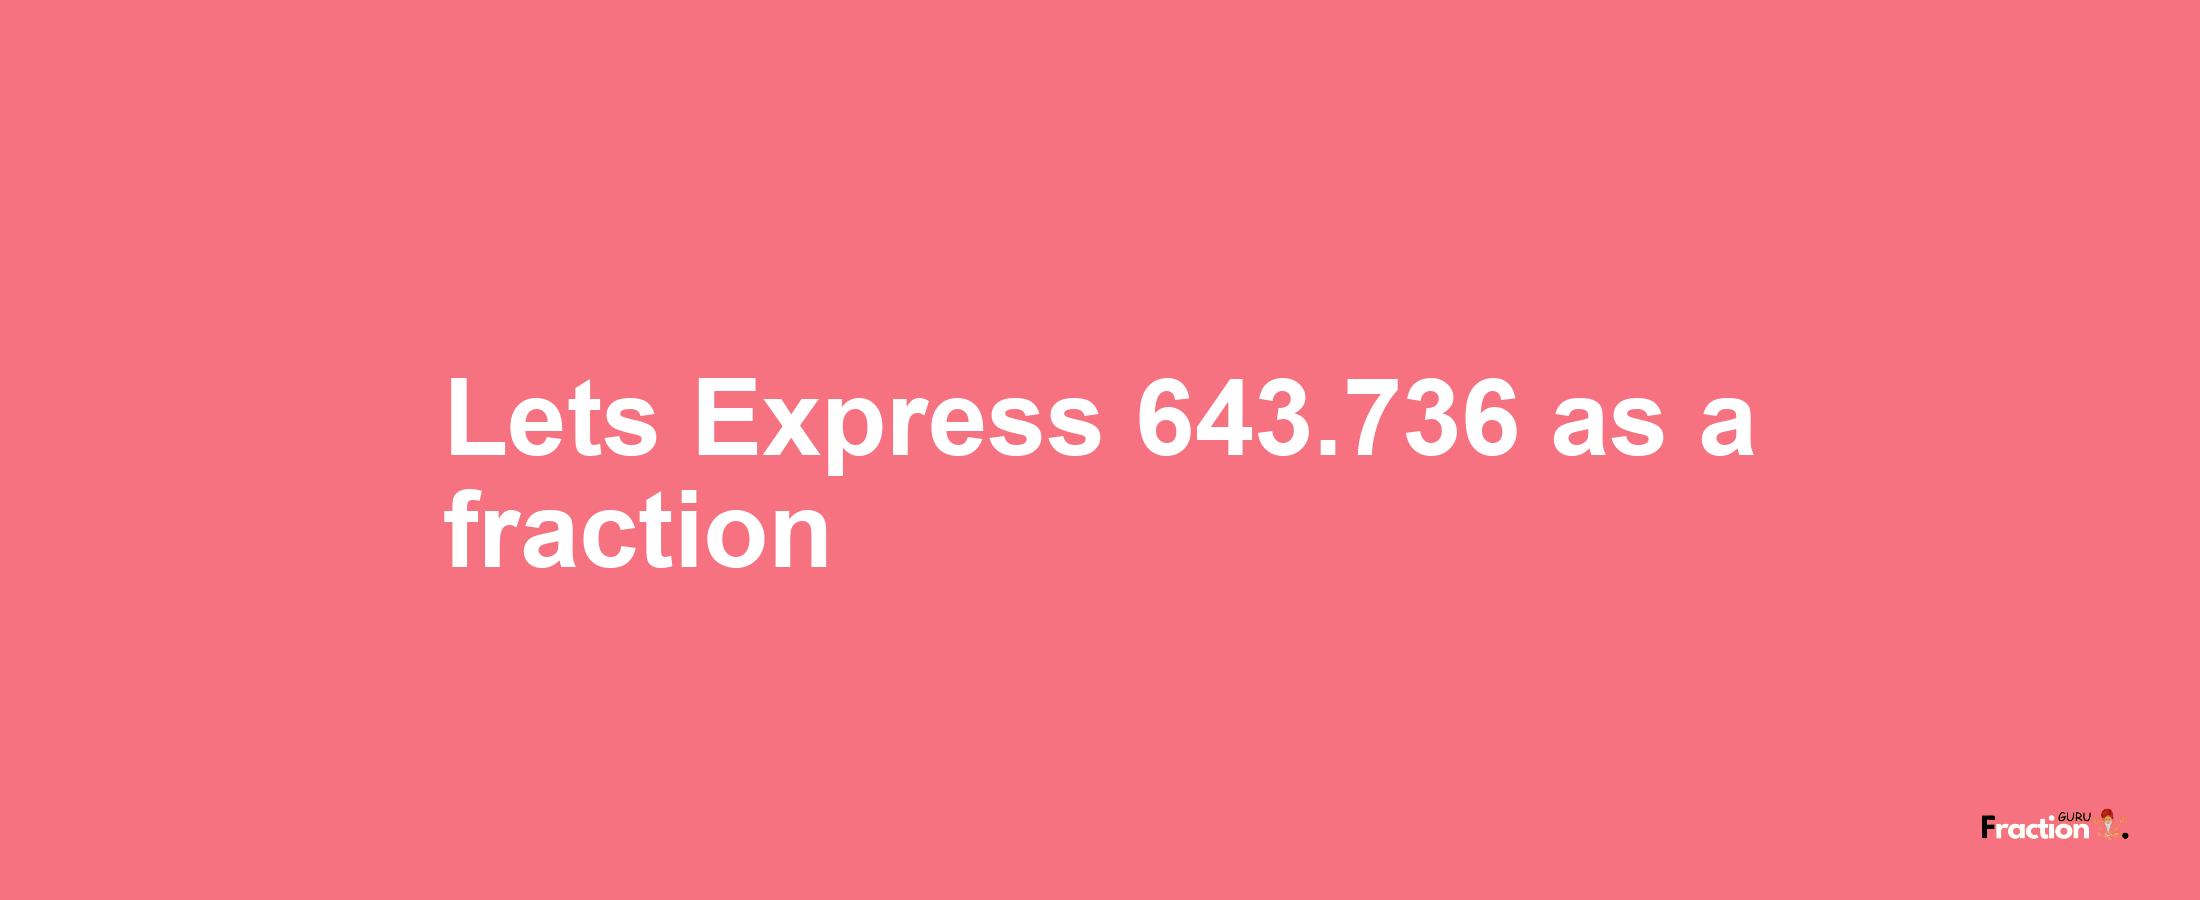 Lets Express 643.736 as afraction